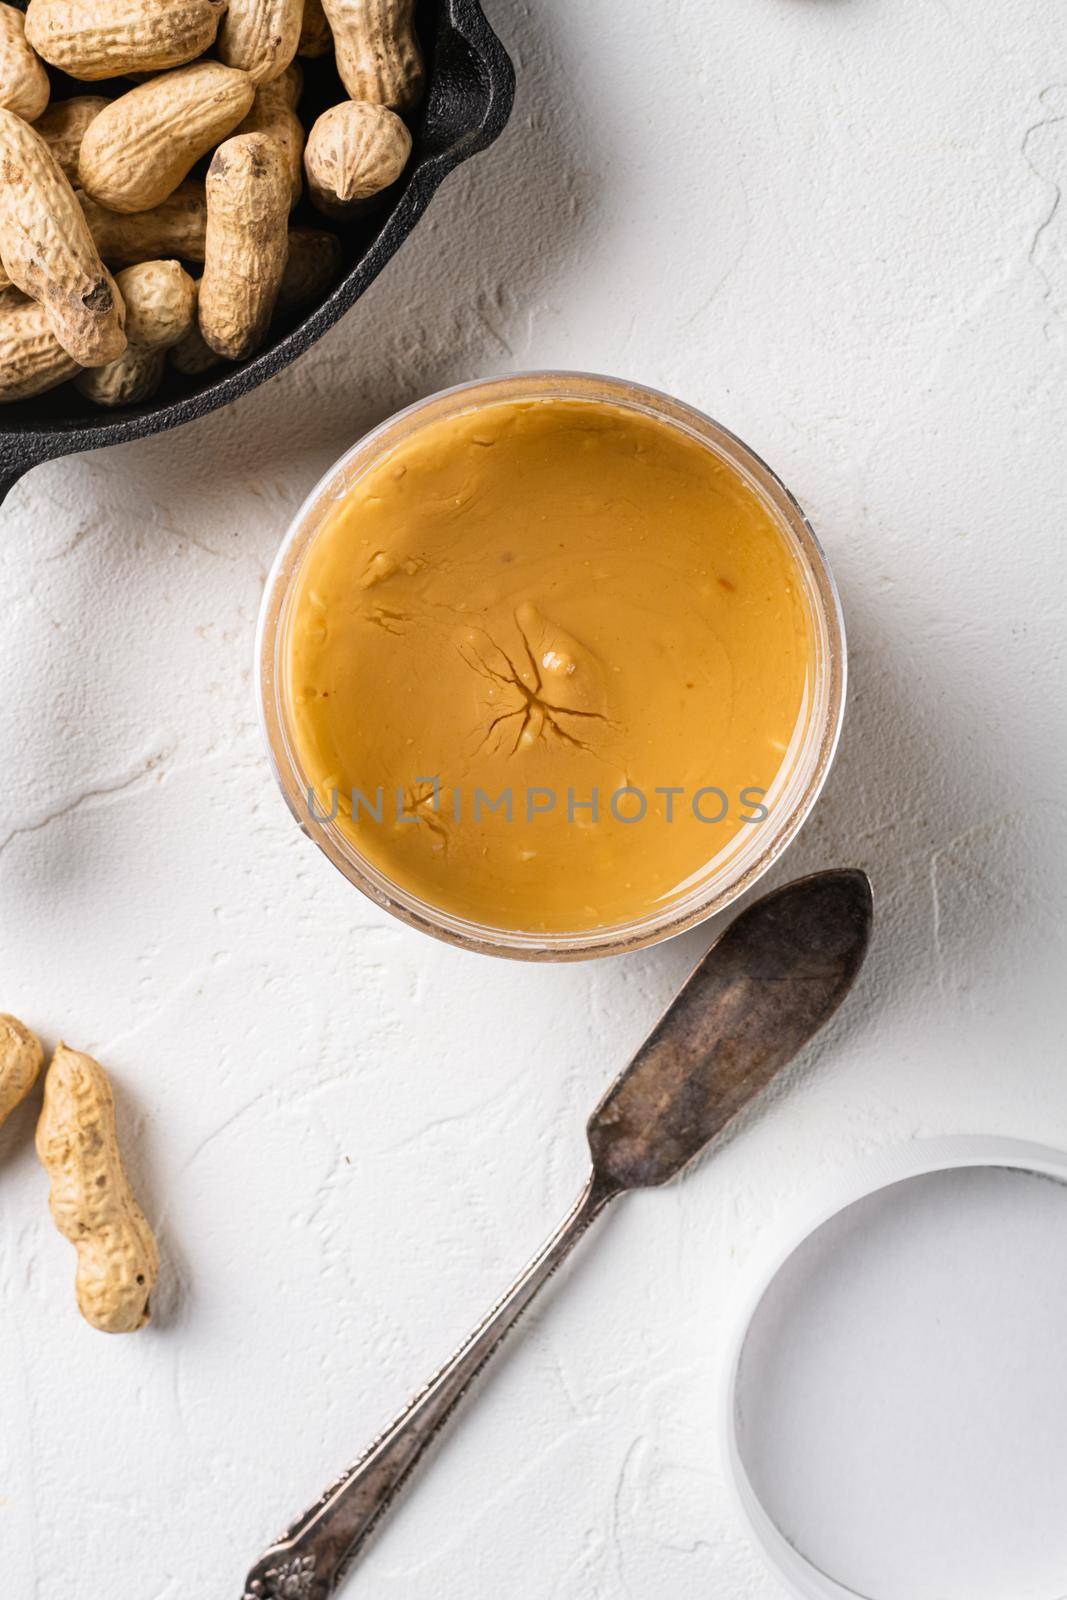 Creamy and smooth peanut butter in jar, on white stone table background, top view flat lay by Ilianesolenyi